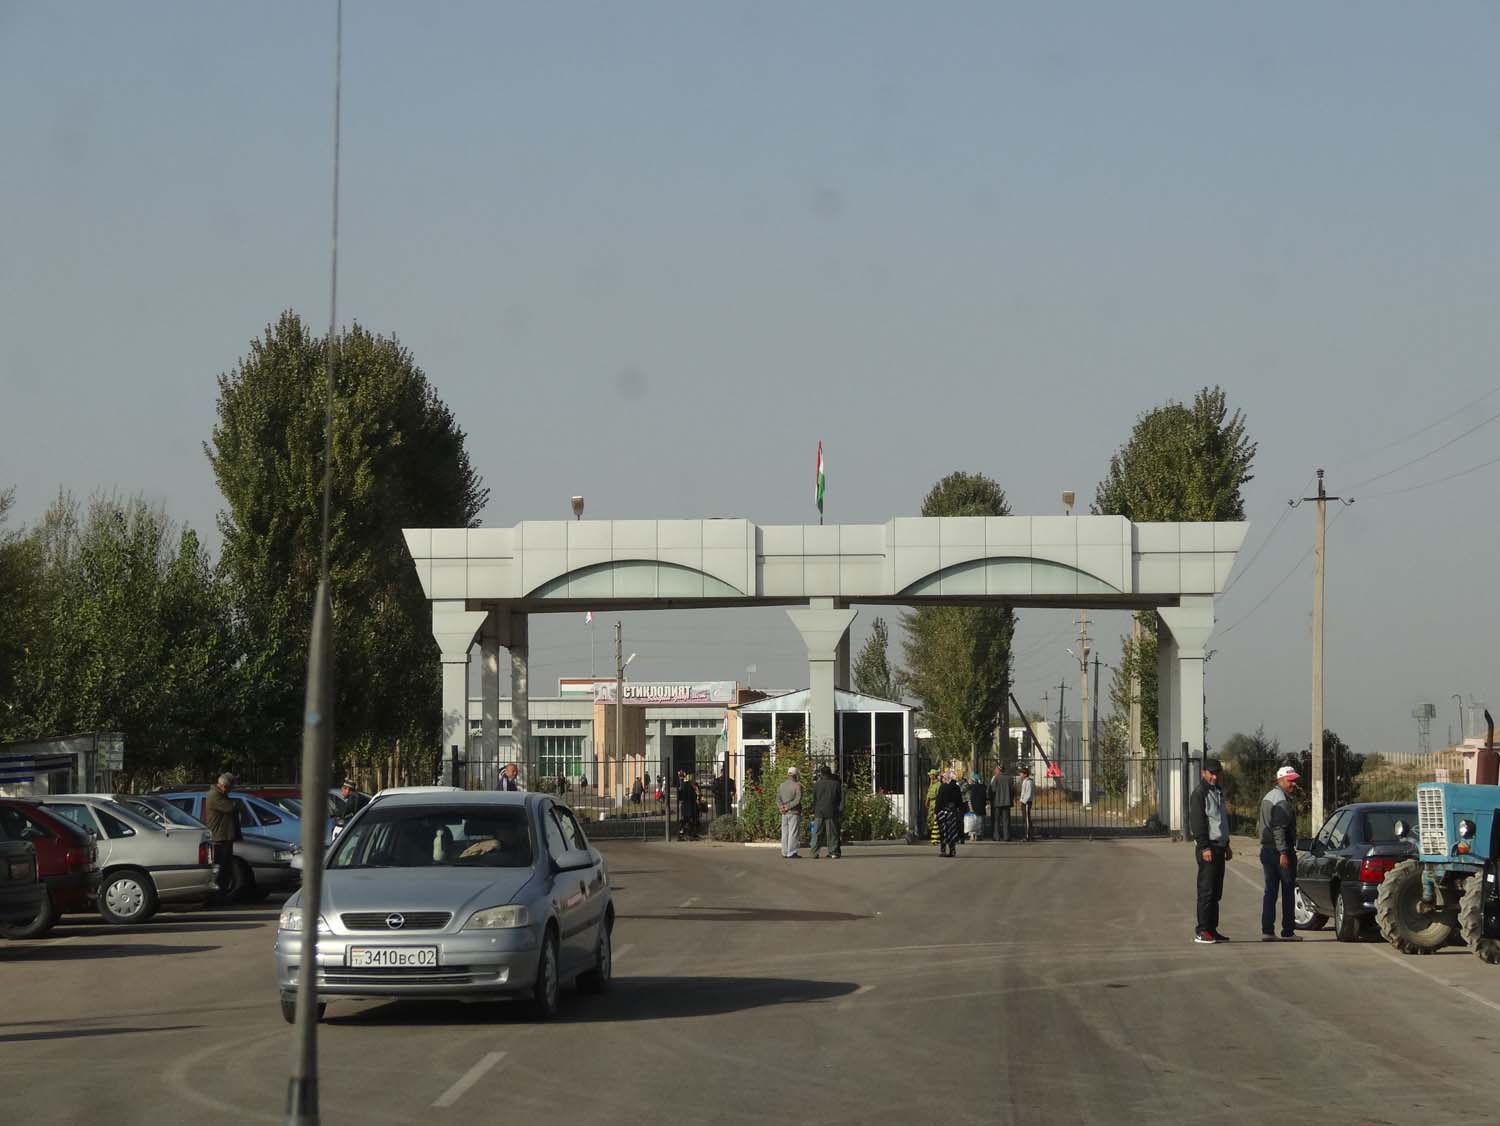 arriving at the Tajikistan side of the border from Khojand, the gate is closed but opened as soon as you arrive